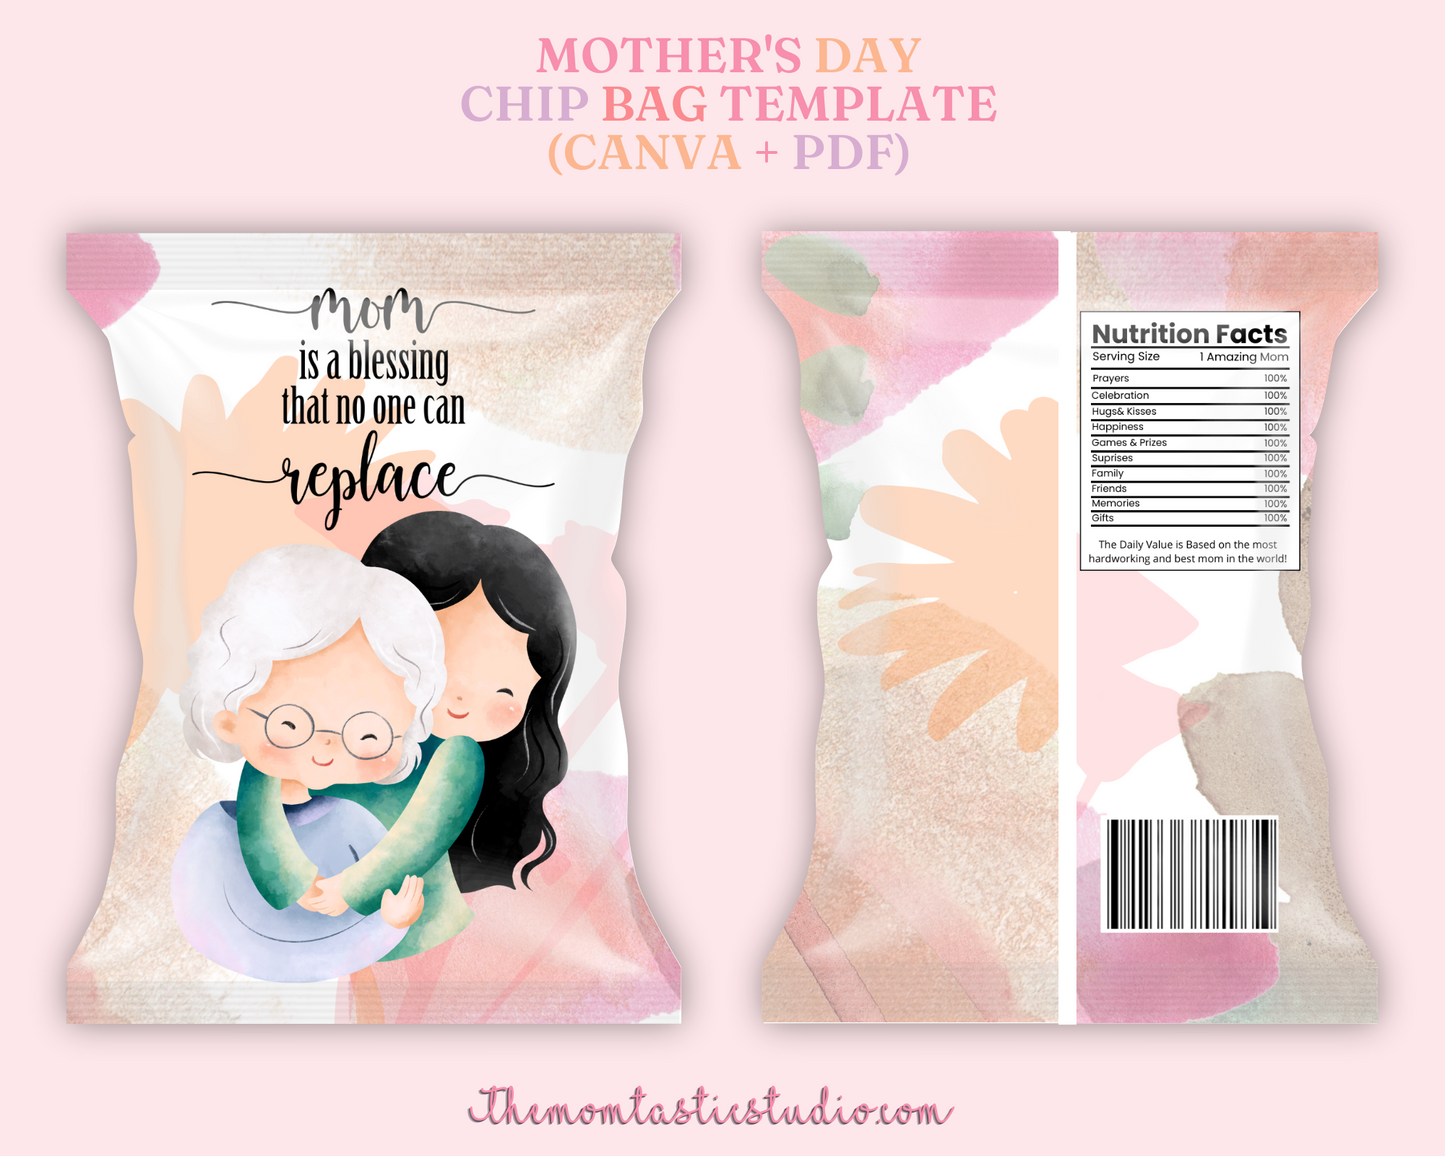 Mother's Day Chip Bag Template – A4 Size – 6 Heartwarming Designs – PDF, PNG, and Canva Template